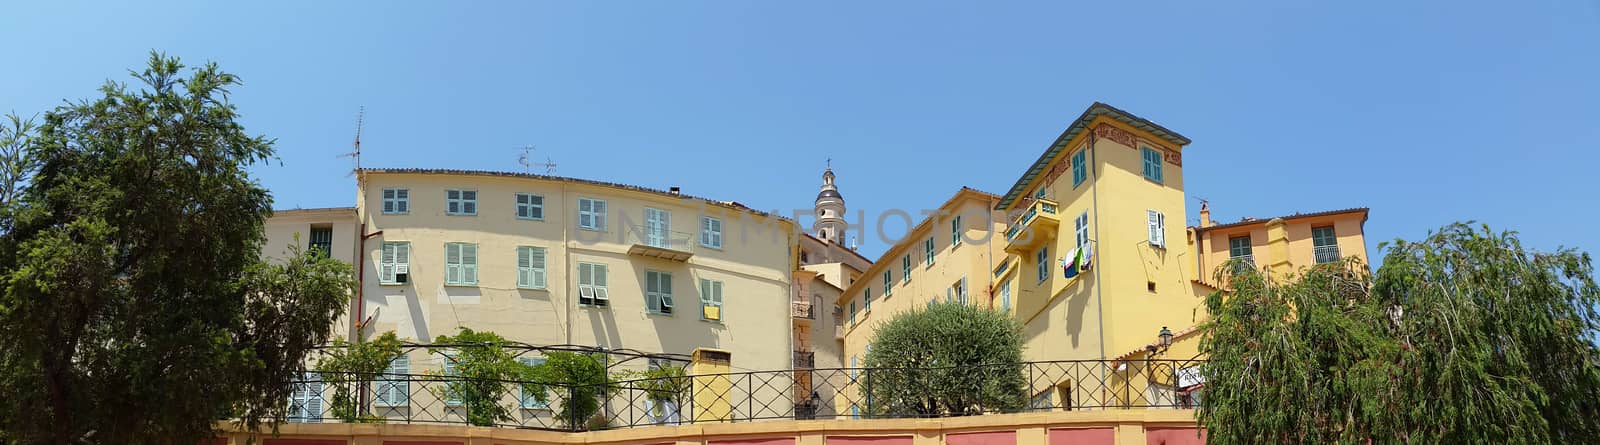 Panoramic View of Menton on the french Riviera in the South of French near the Italian border